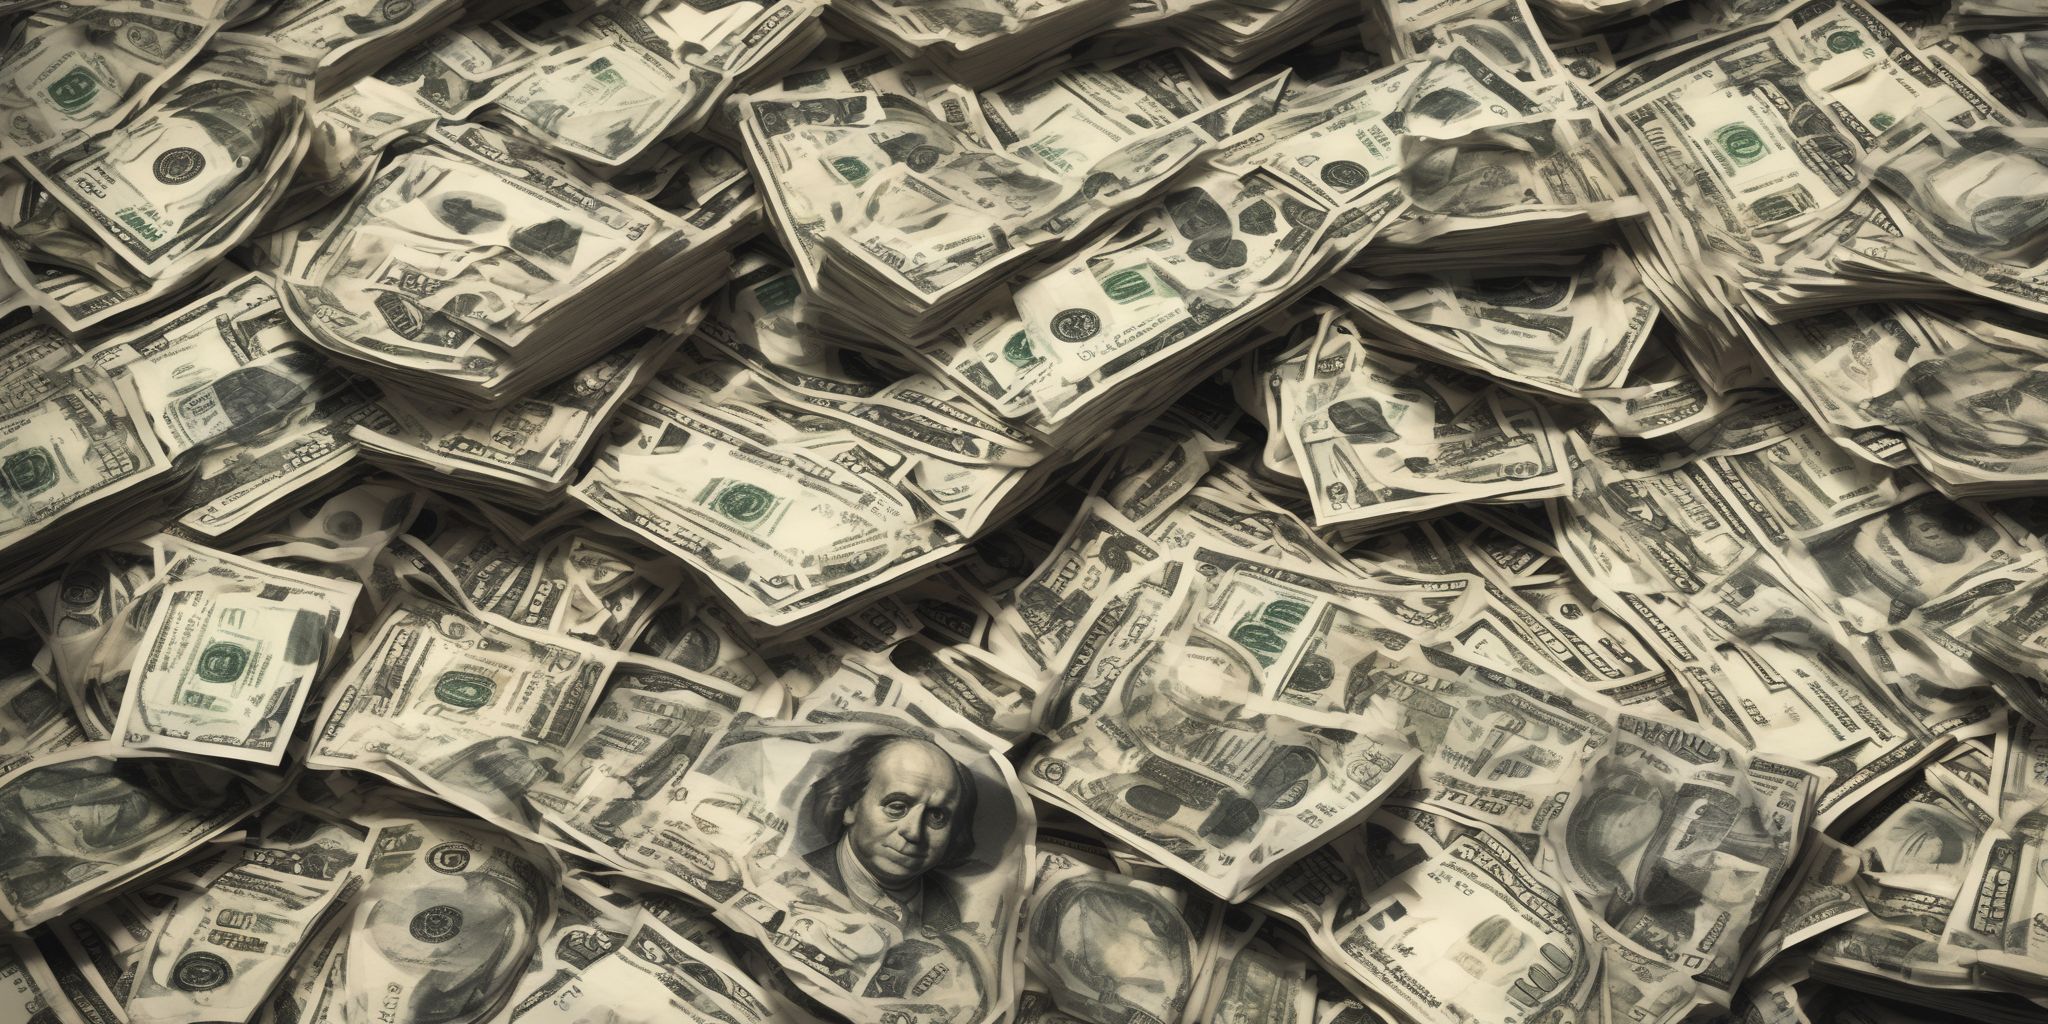 Money  in realistic, photographic style